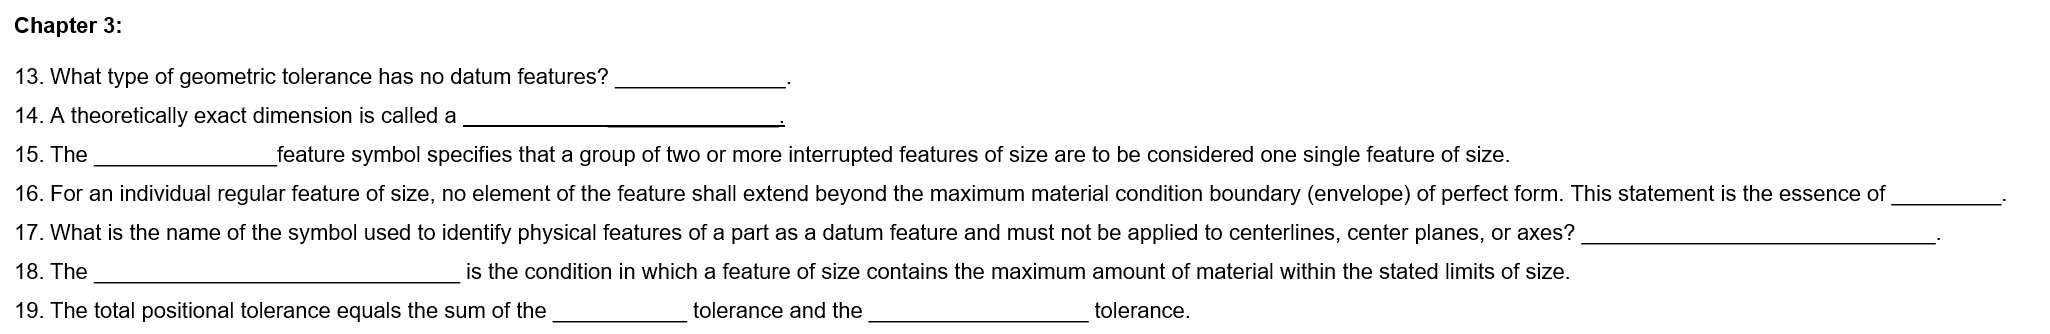 Chapter 3:
13. What type of geometric tolerance has no datum features?
14. A theoretically exact dimension is called a
15. The
feature symbol specifies that a group of two or more interrupted features of size are to be considered one single feature of size.
16. For an individual regular feature of size, no element of the feature shall extend beyond the maximum material condition boundary (envelope) of perfect form. This statement is the essence of
17. What is the name of the symbol used to identify physical features of a part as a datum feature and must not be applied to centerlines, center planes, or axes?
18. The
is the condition in which a feature of size contains the maximum amount of material within the stated limits of size.
19. The total positional tolerance equals the sum of the
tolerance and the
tolerance.